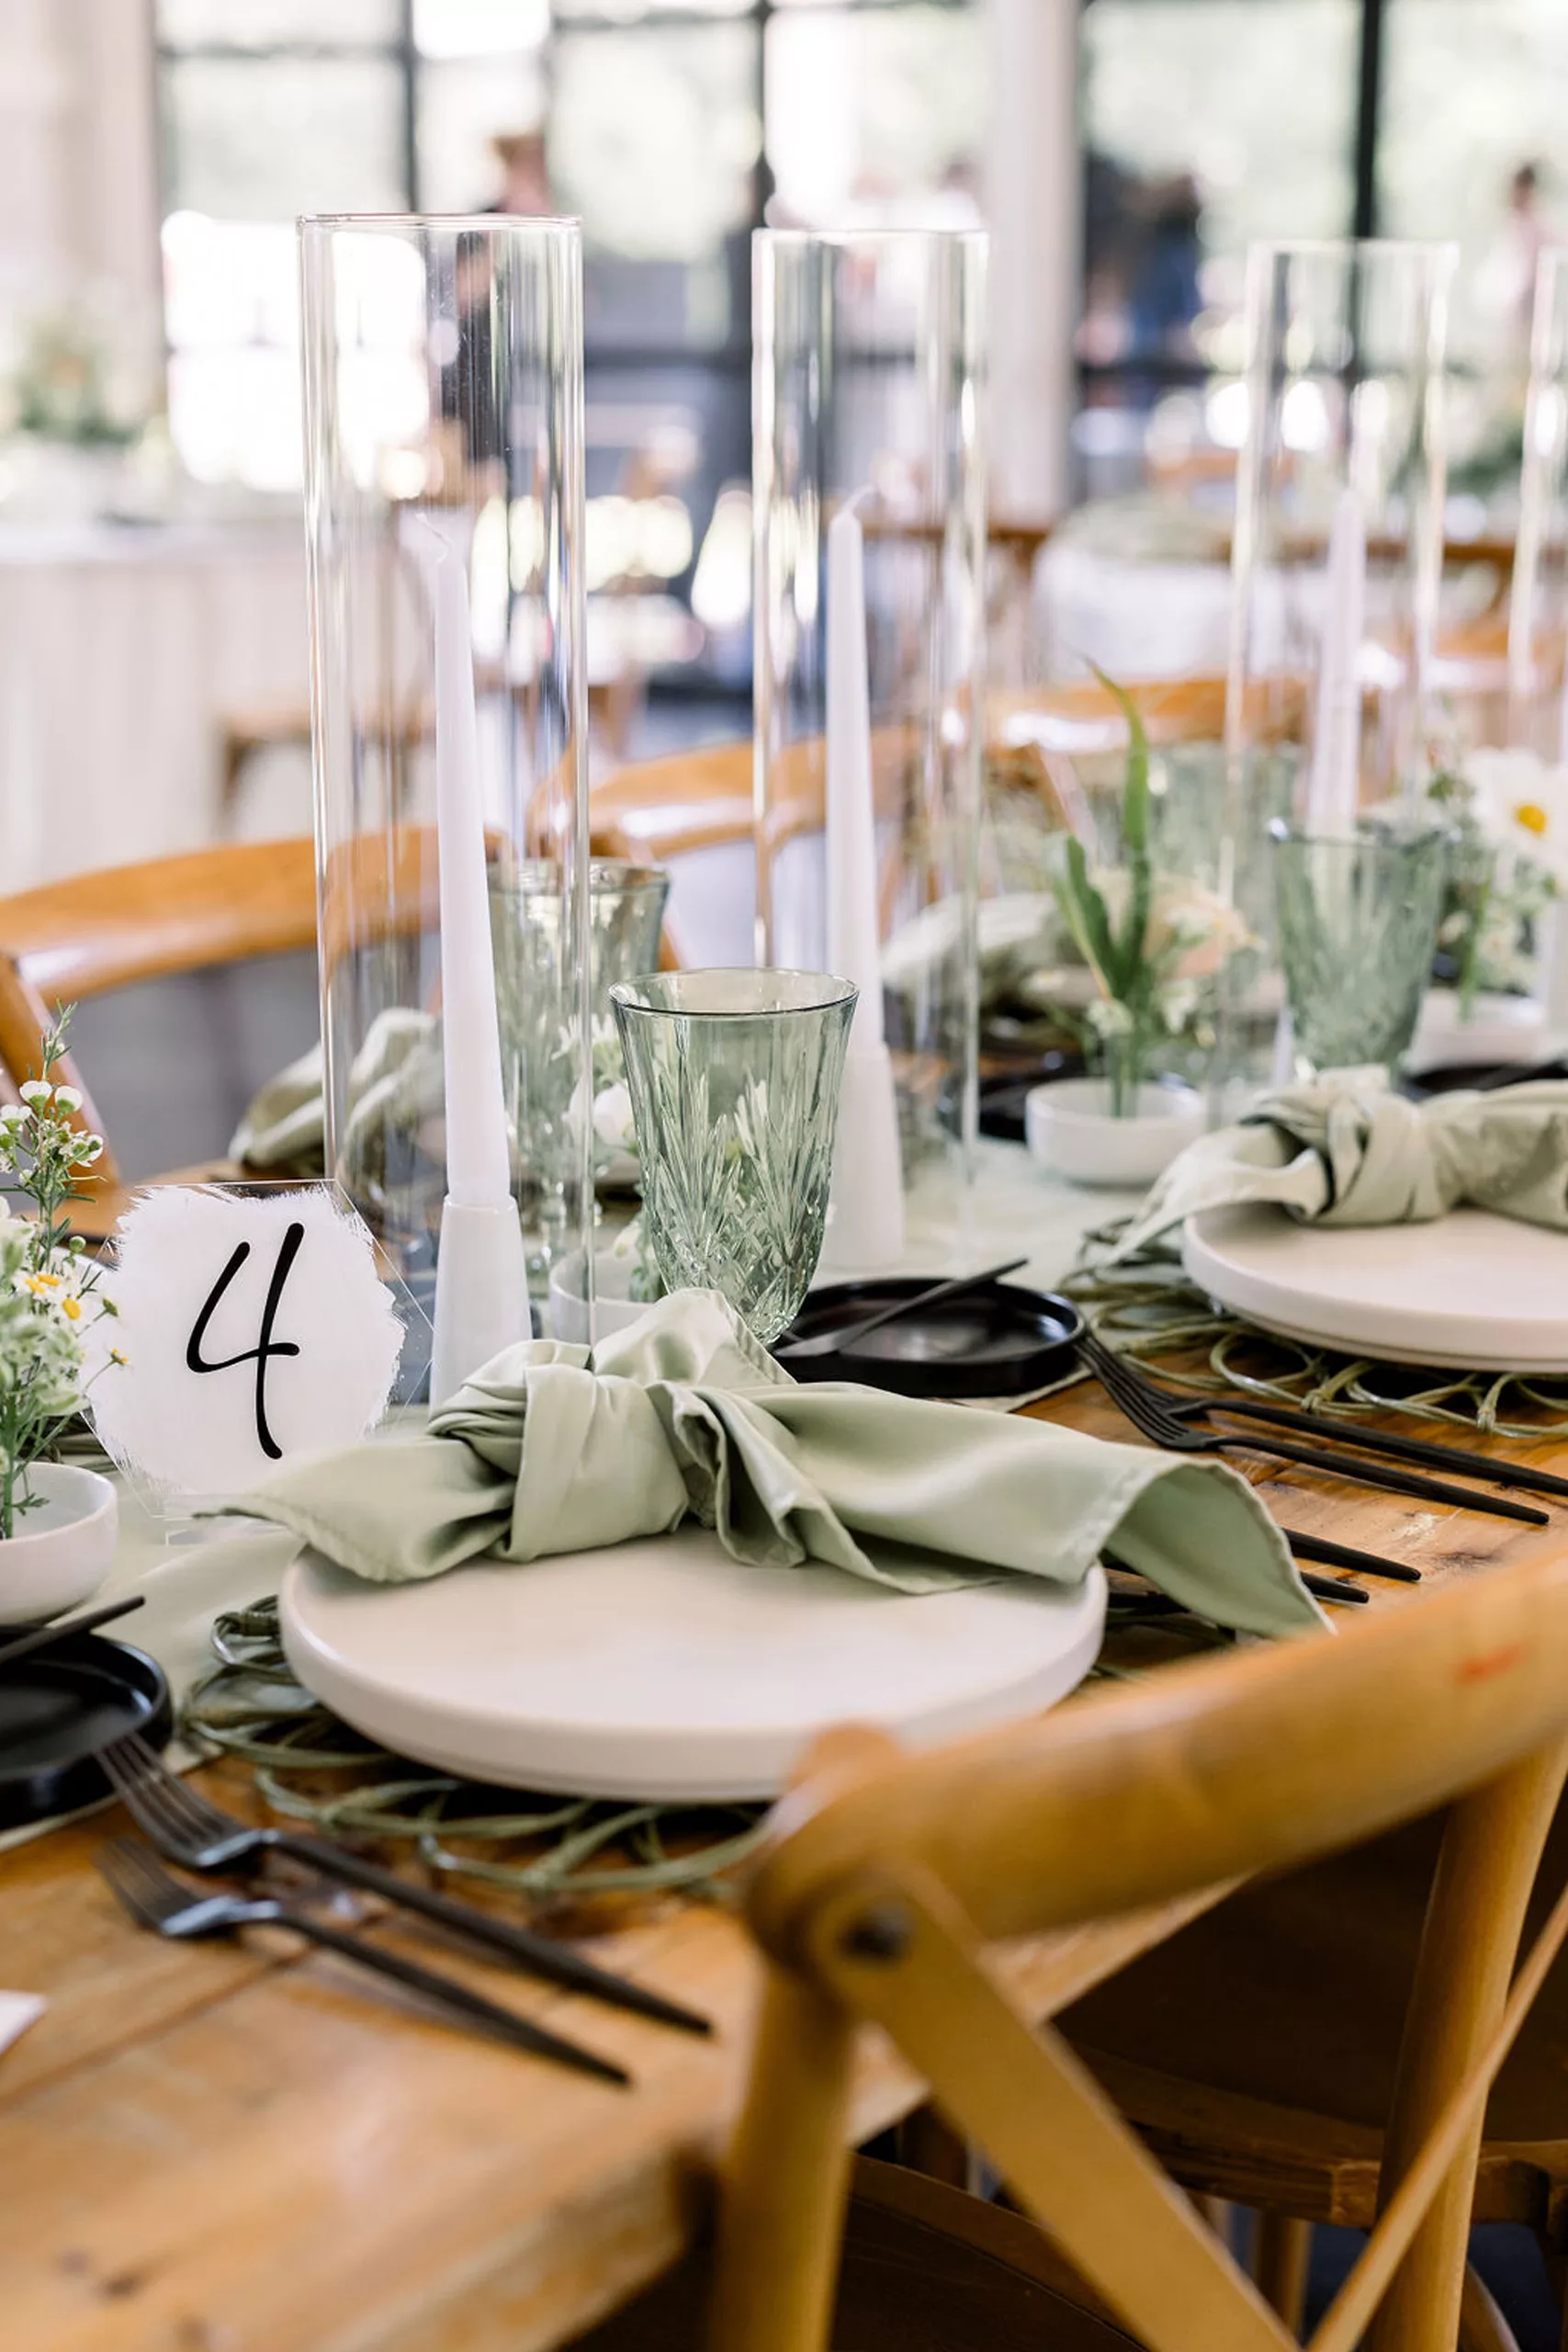 Details of a table setting on wood with wood chairs and green glasses and napkins